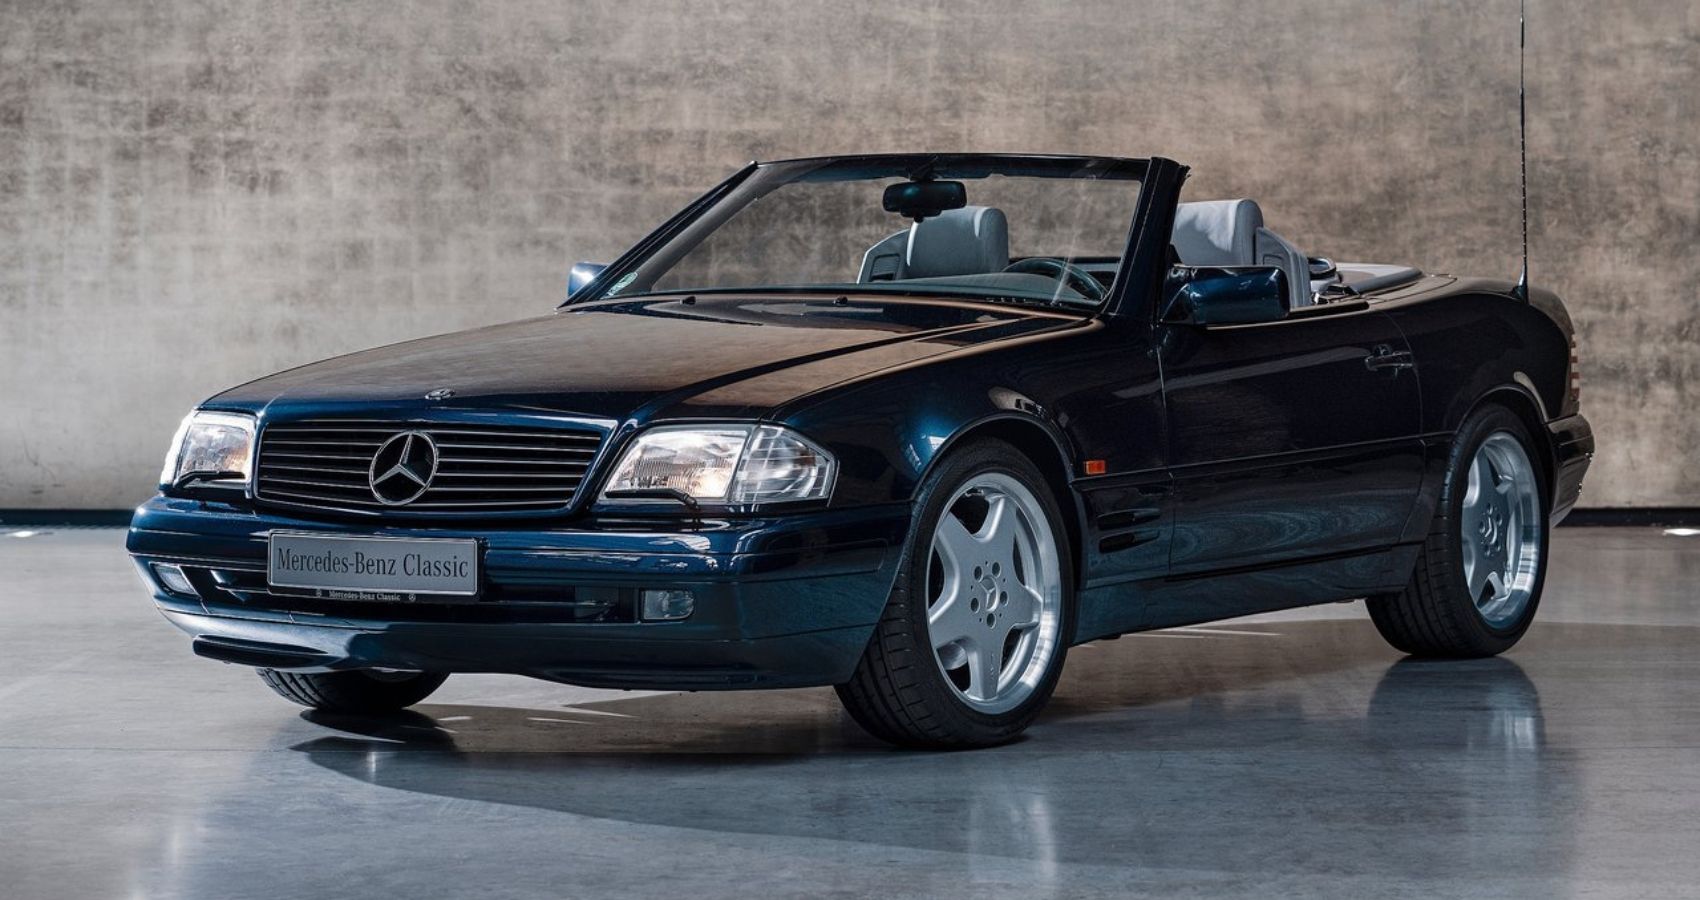 Mercedes-Benz SL 600 (1995) - Front Angle